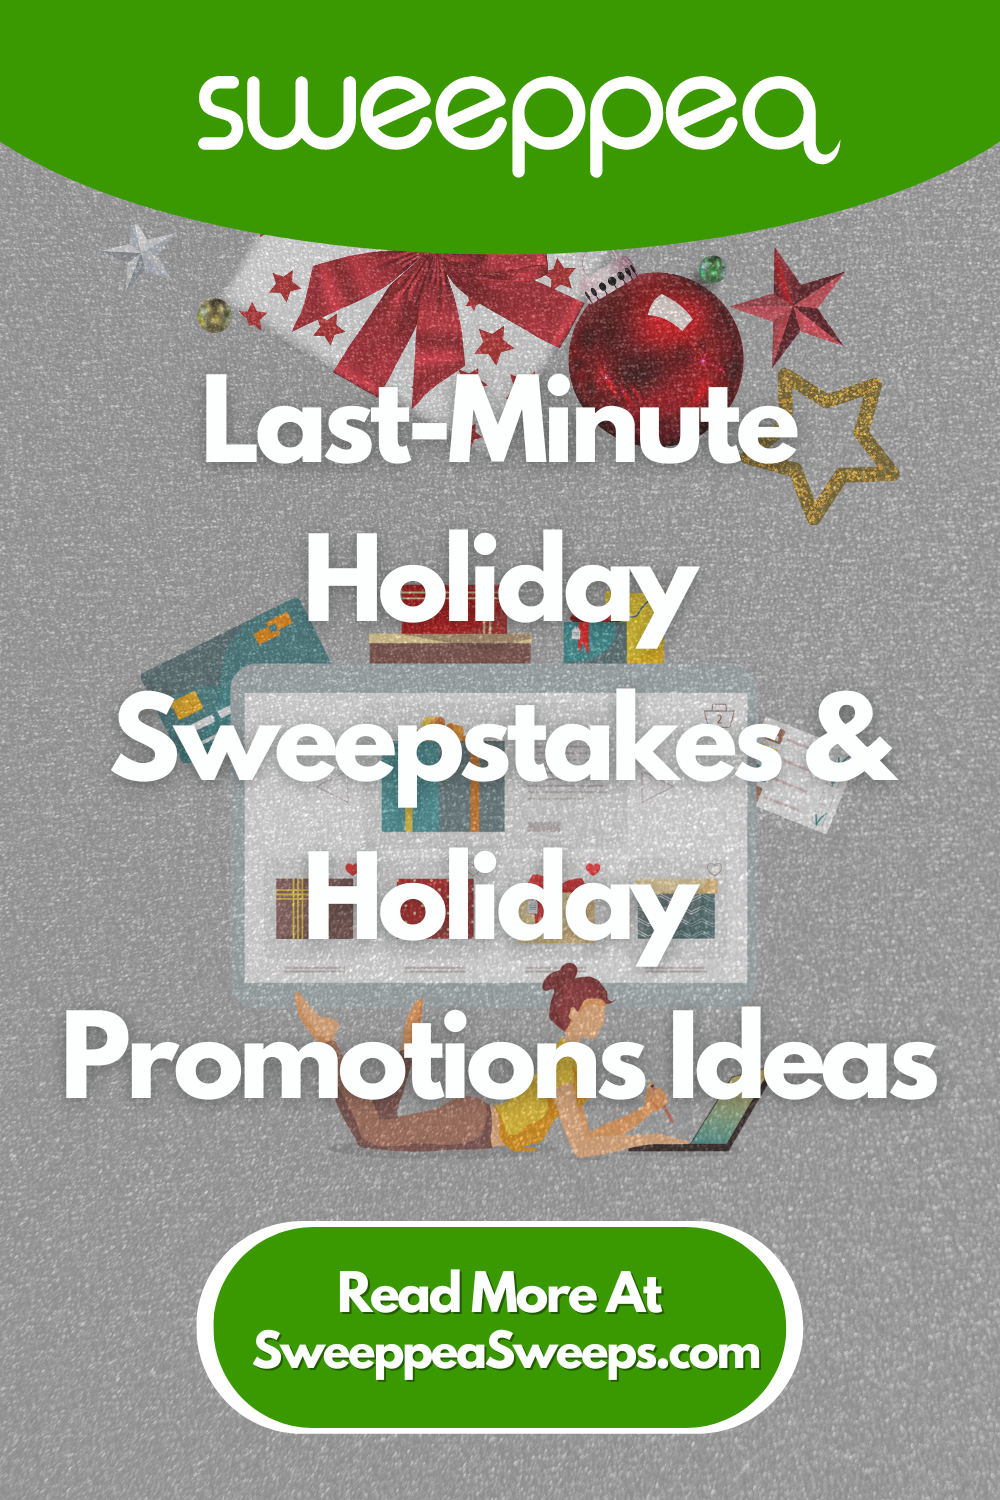 Last-Minute Holiday Sweepstakes & Holiday Promotions Ideas